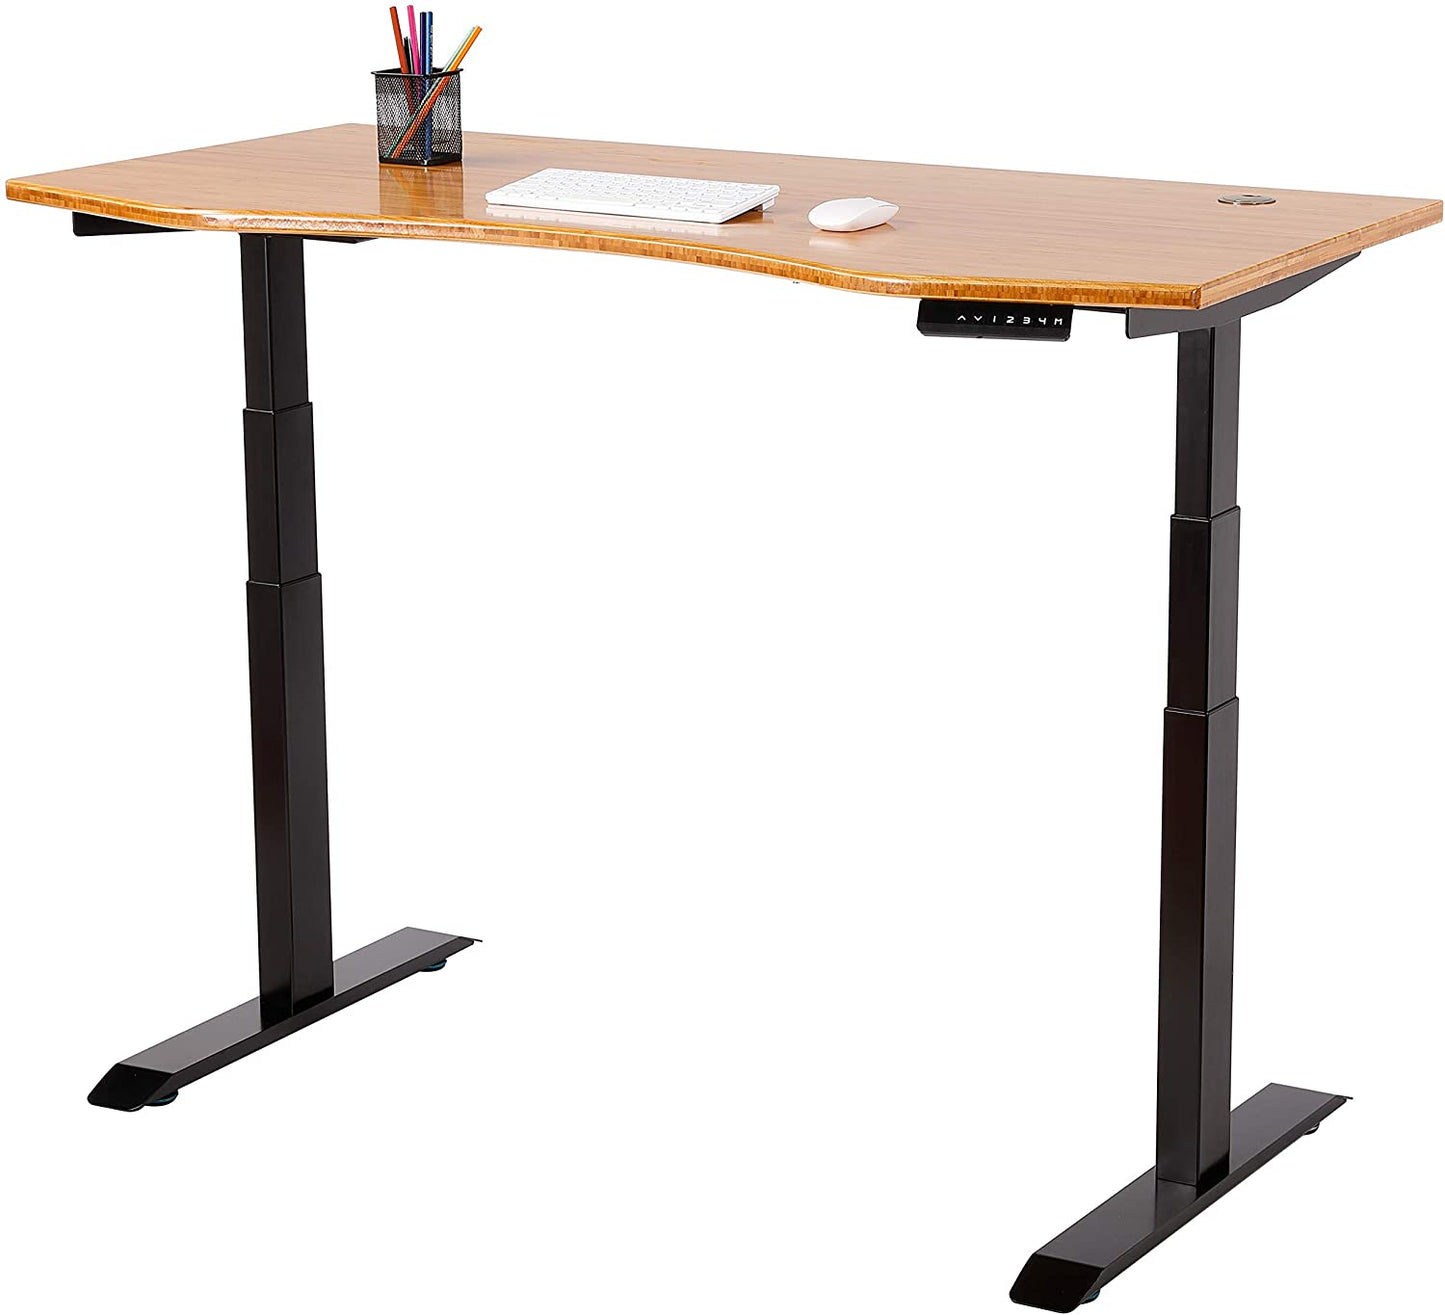 UNICOO - Electric Stand Up Desk Dual Motor, 3 Stage Up Lifting Legs with 1 Inch Thick Bamboo Table Top, LED 4 Memory Control Keypad